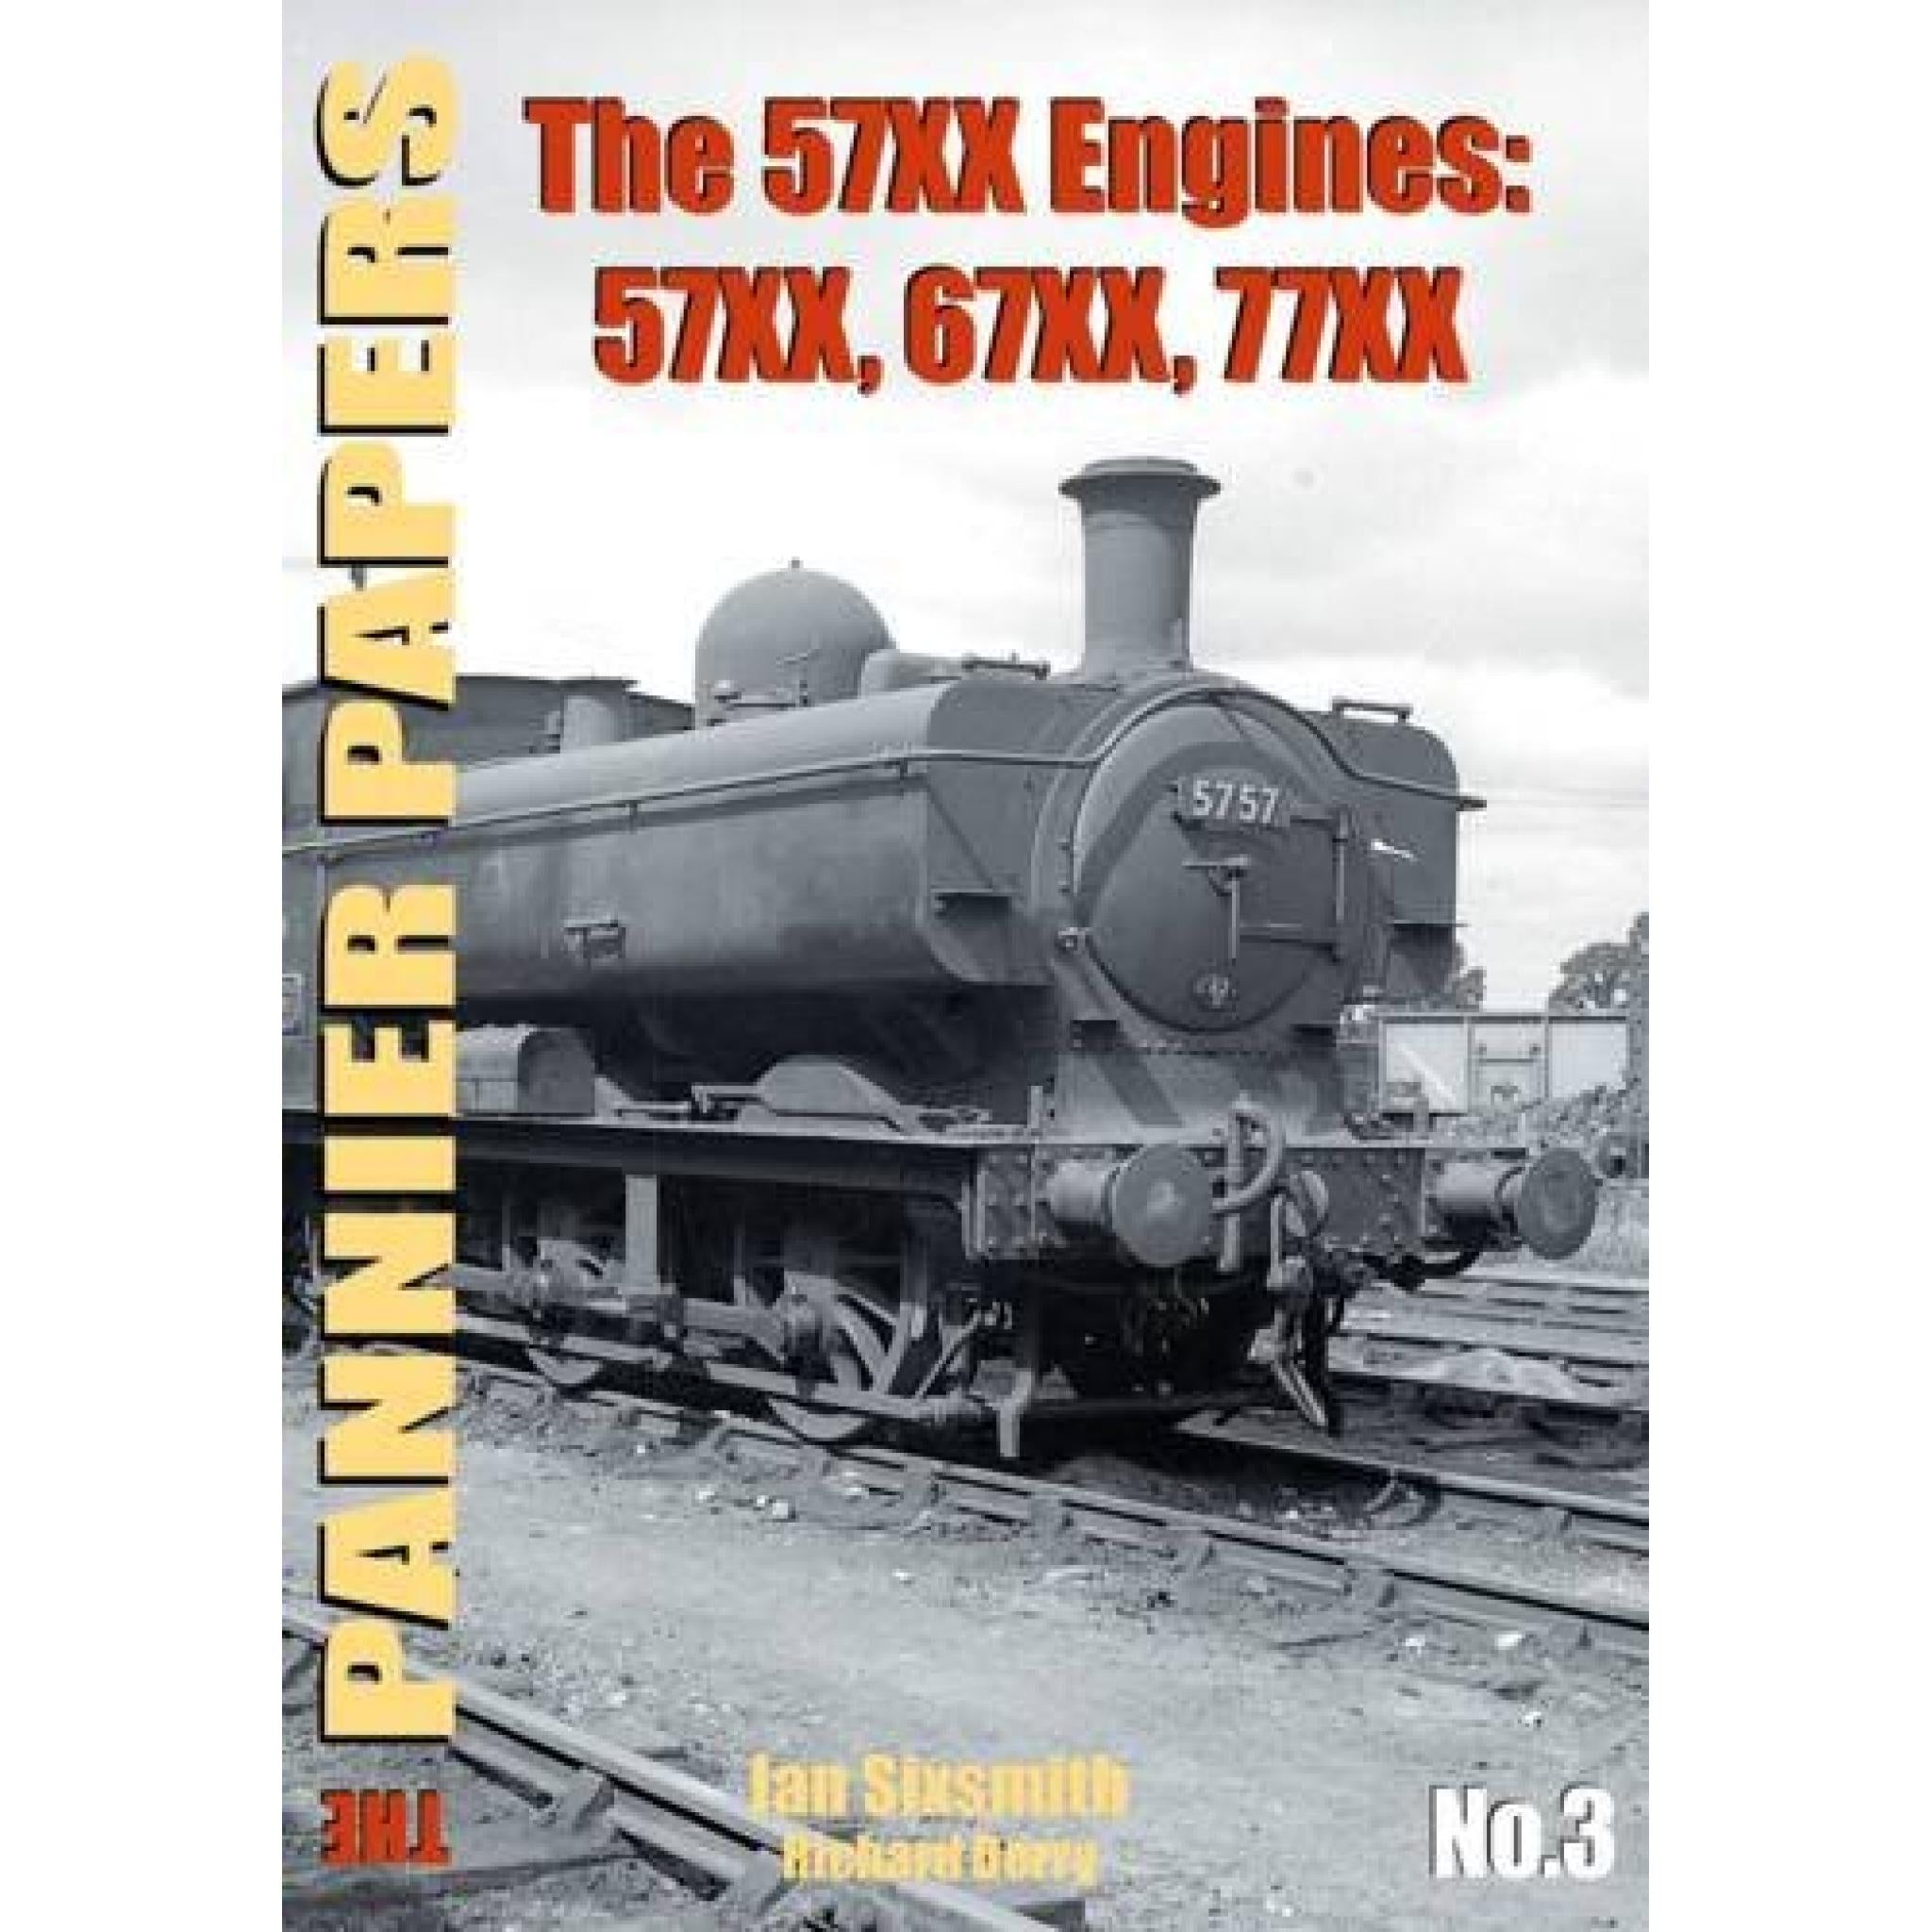 50%+ OFF RRP is £12.95 The PANNIER PAPERS No.3 The 57XX Engines: 57XX, 67XX, 77XX